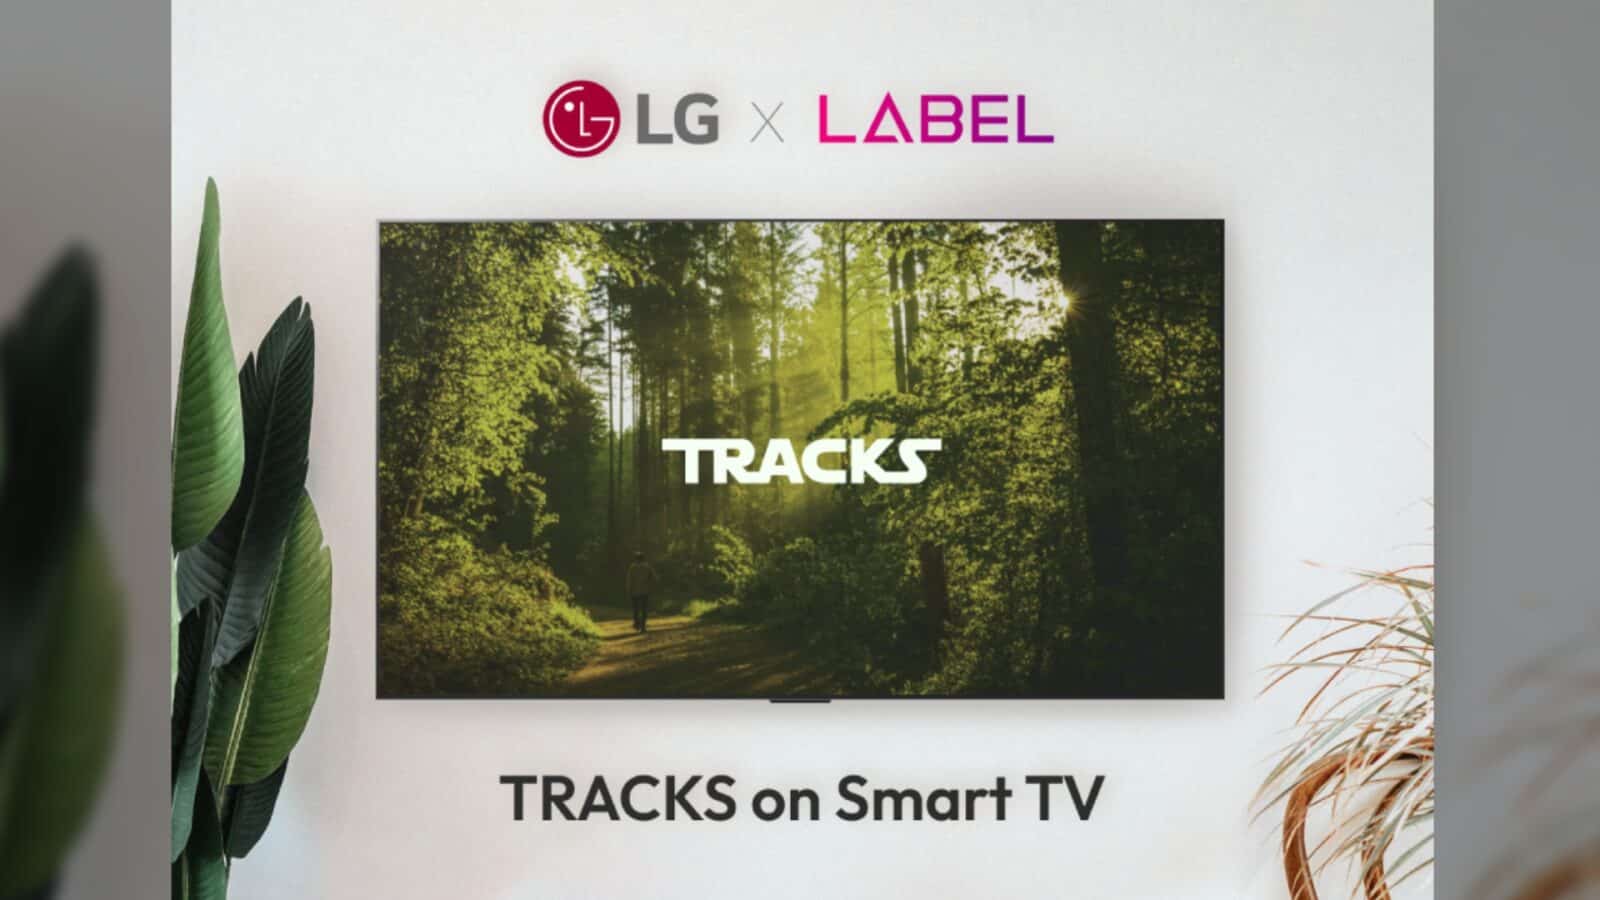 Web3 Music Streaming App 'Tracks' Now Available on LG Smart TVs